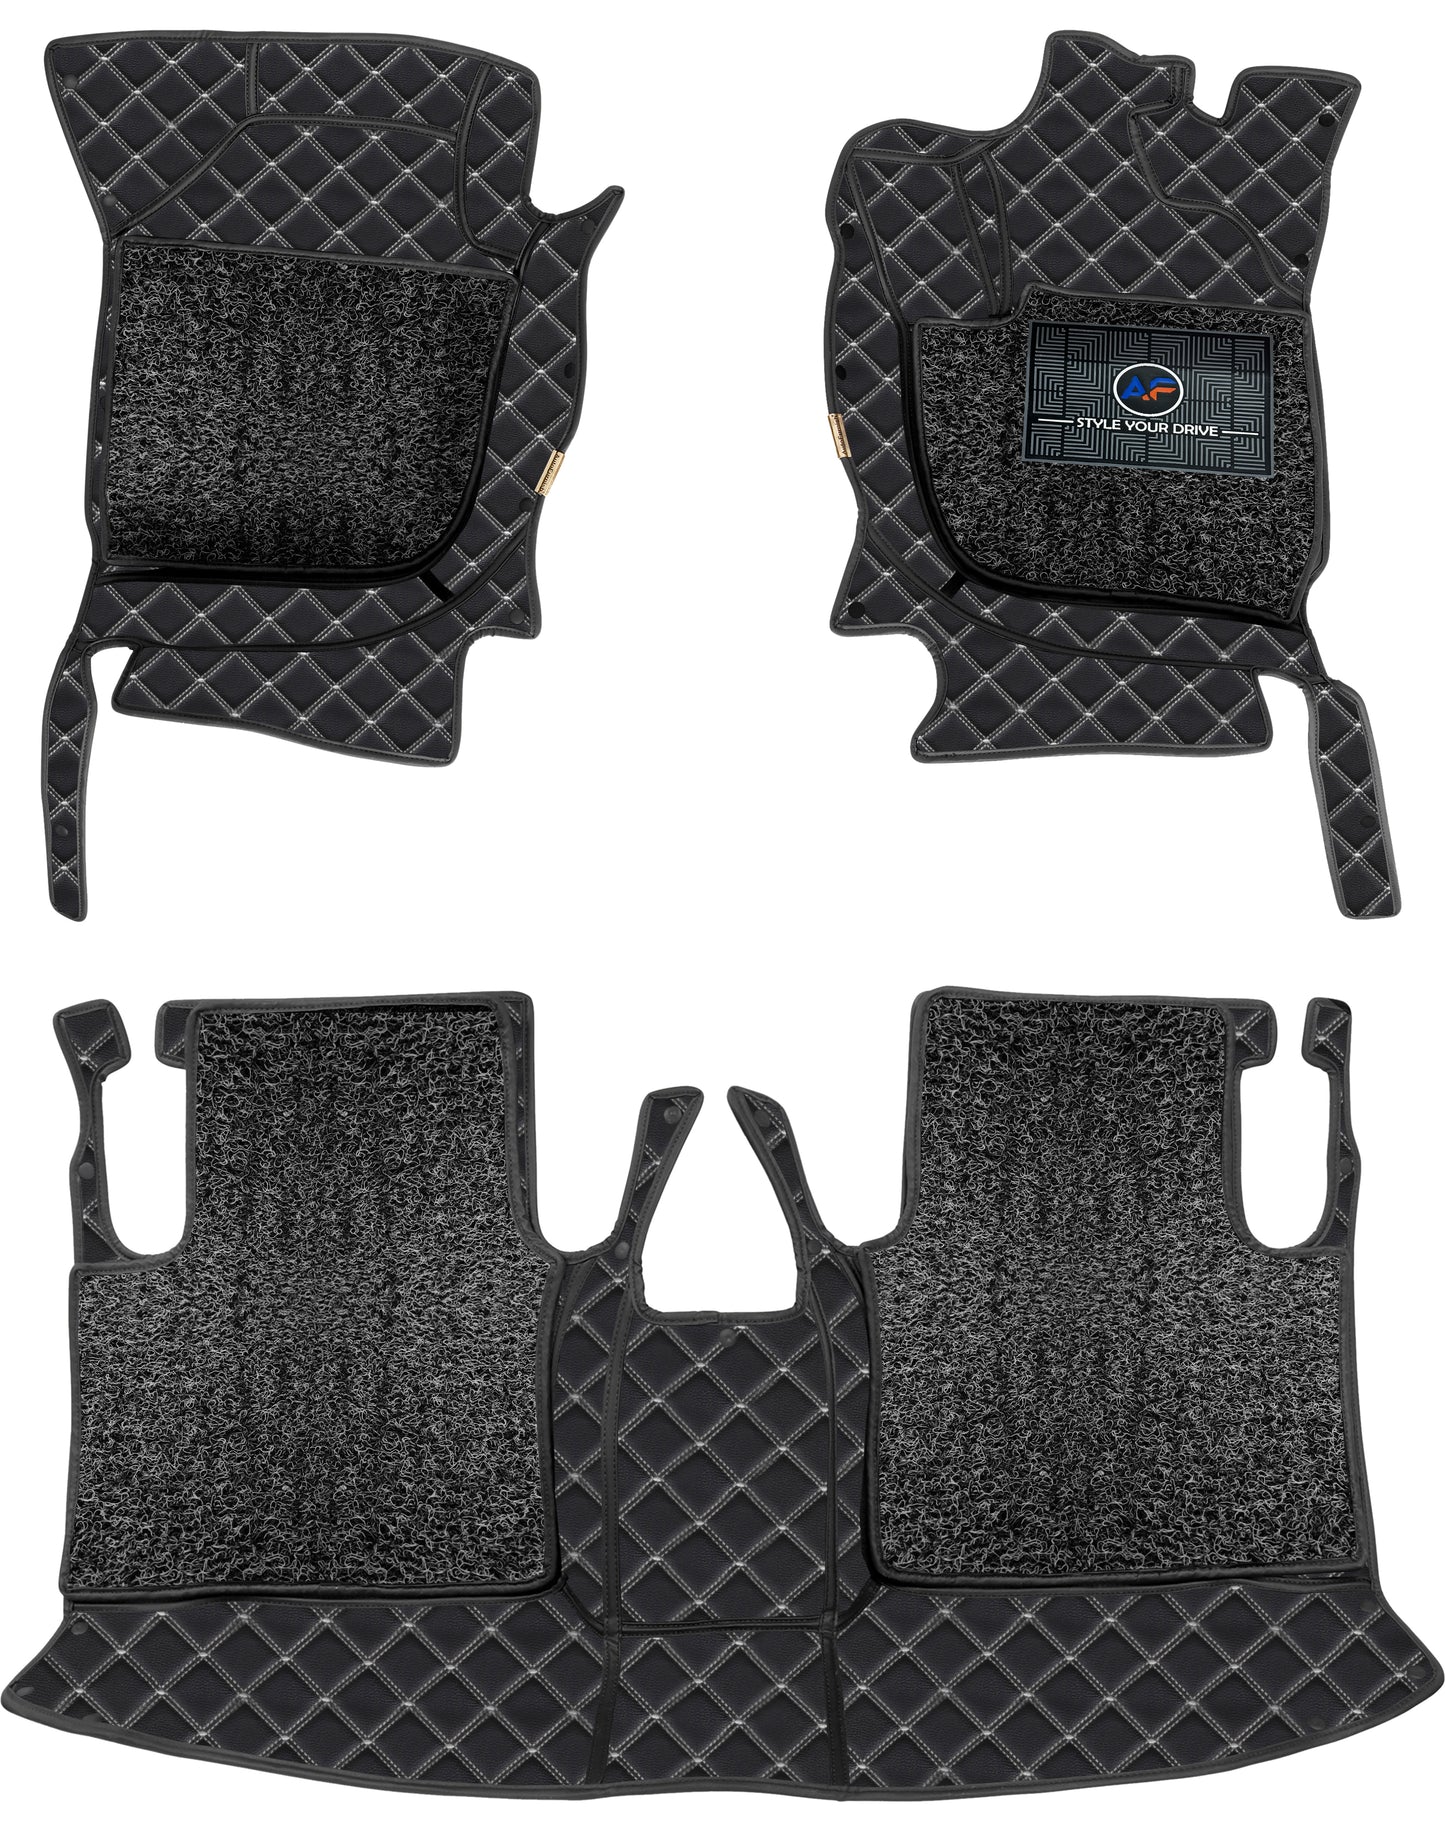 Citroen C5 Aircross 2021 7D Luxury Car Mat, All Weather Proof, Anti-Skid, 100% Waterproof & Odorless with Unique Diamond Fish Design (24mm Luxury PU Leather, 2 Rows)